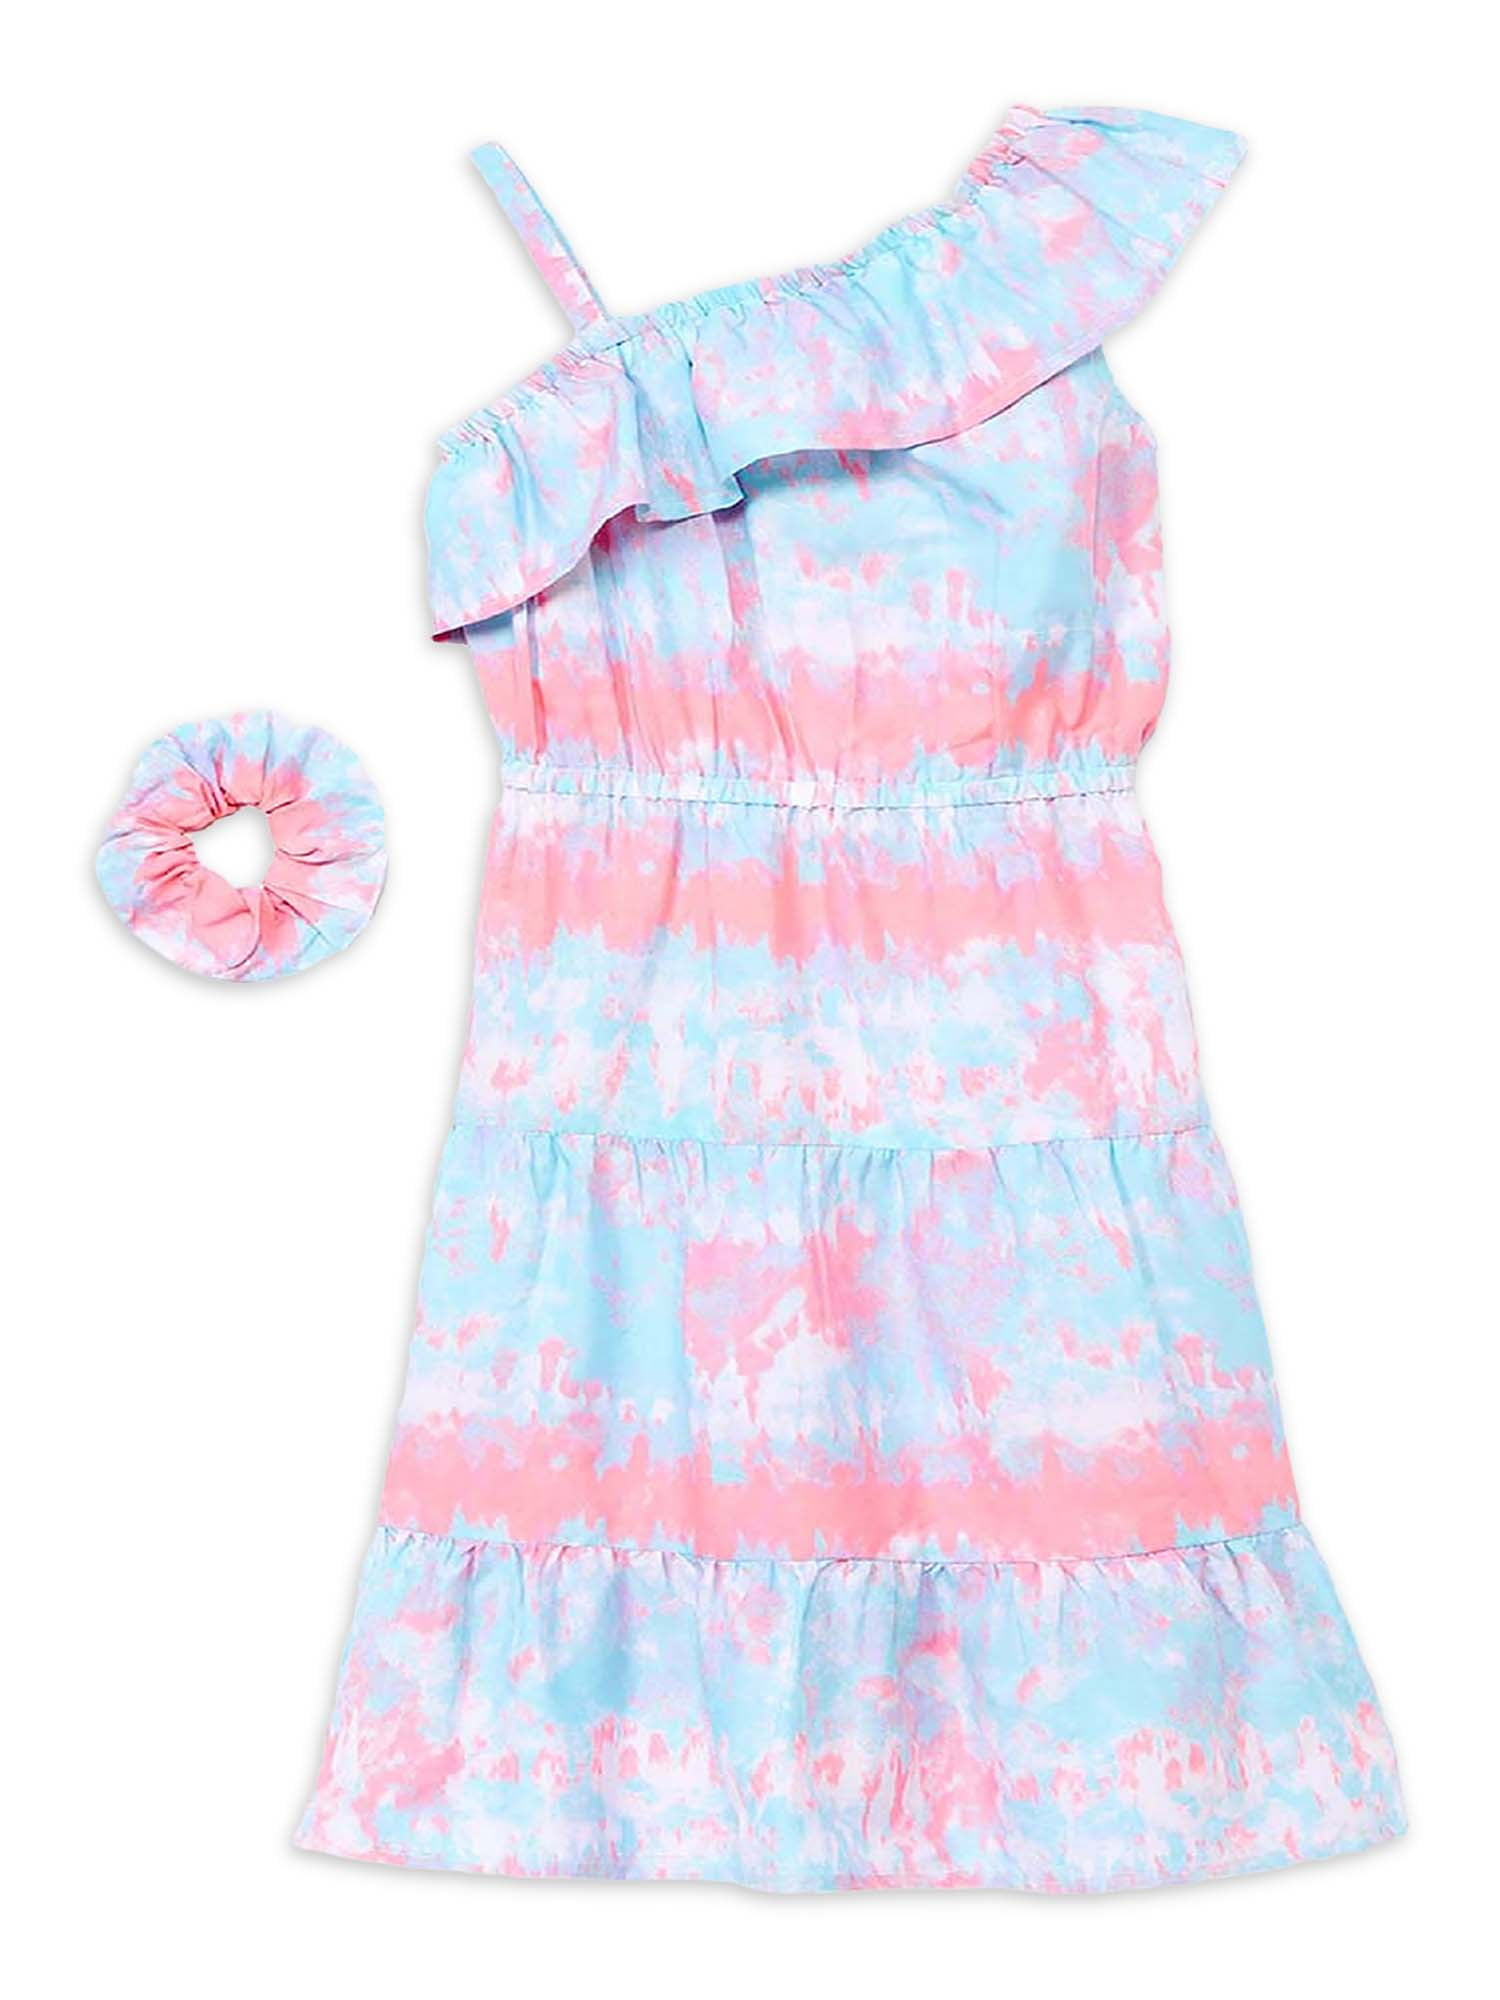 Freestyle Revolution Toddler Girls Tie-Dye Printed Dress with Hair Accessory,  Sizes 2T-4T 